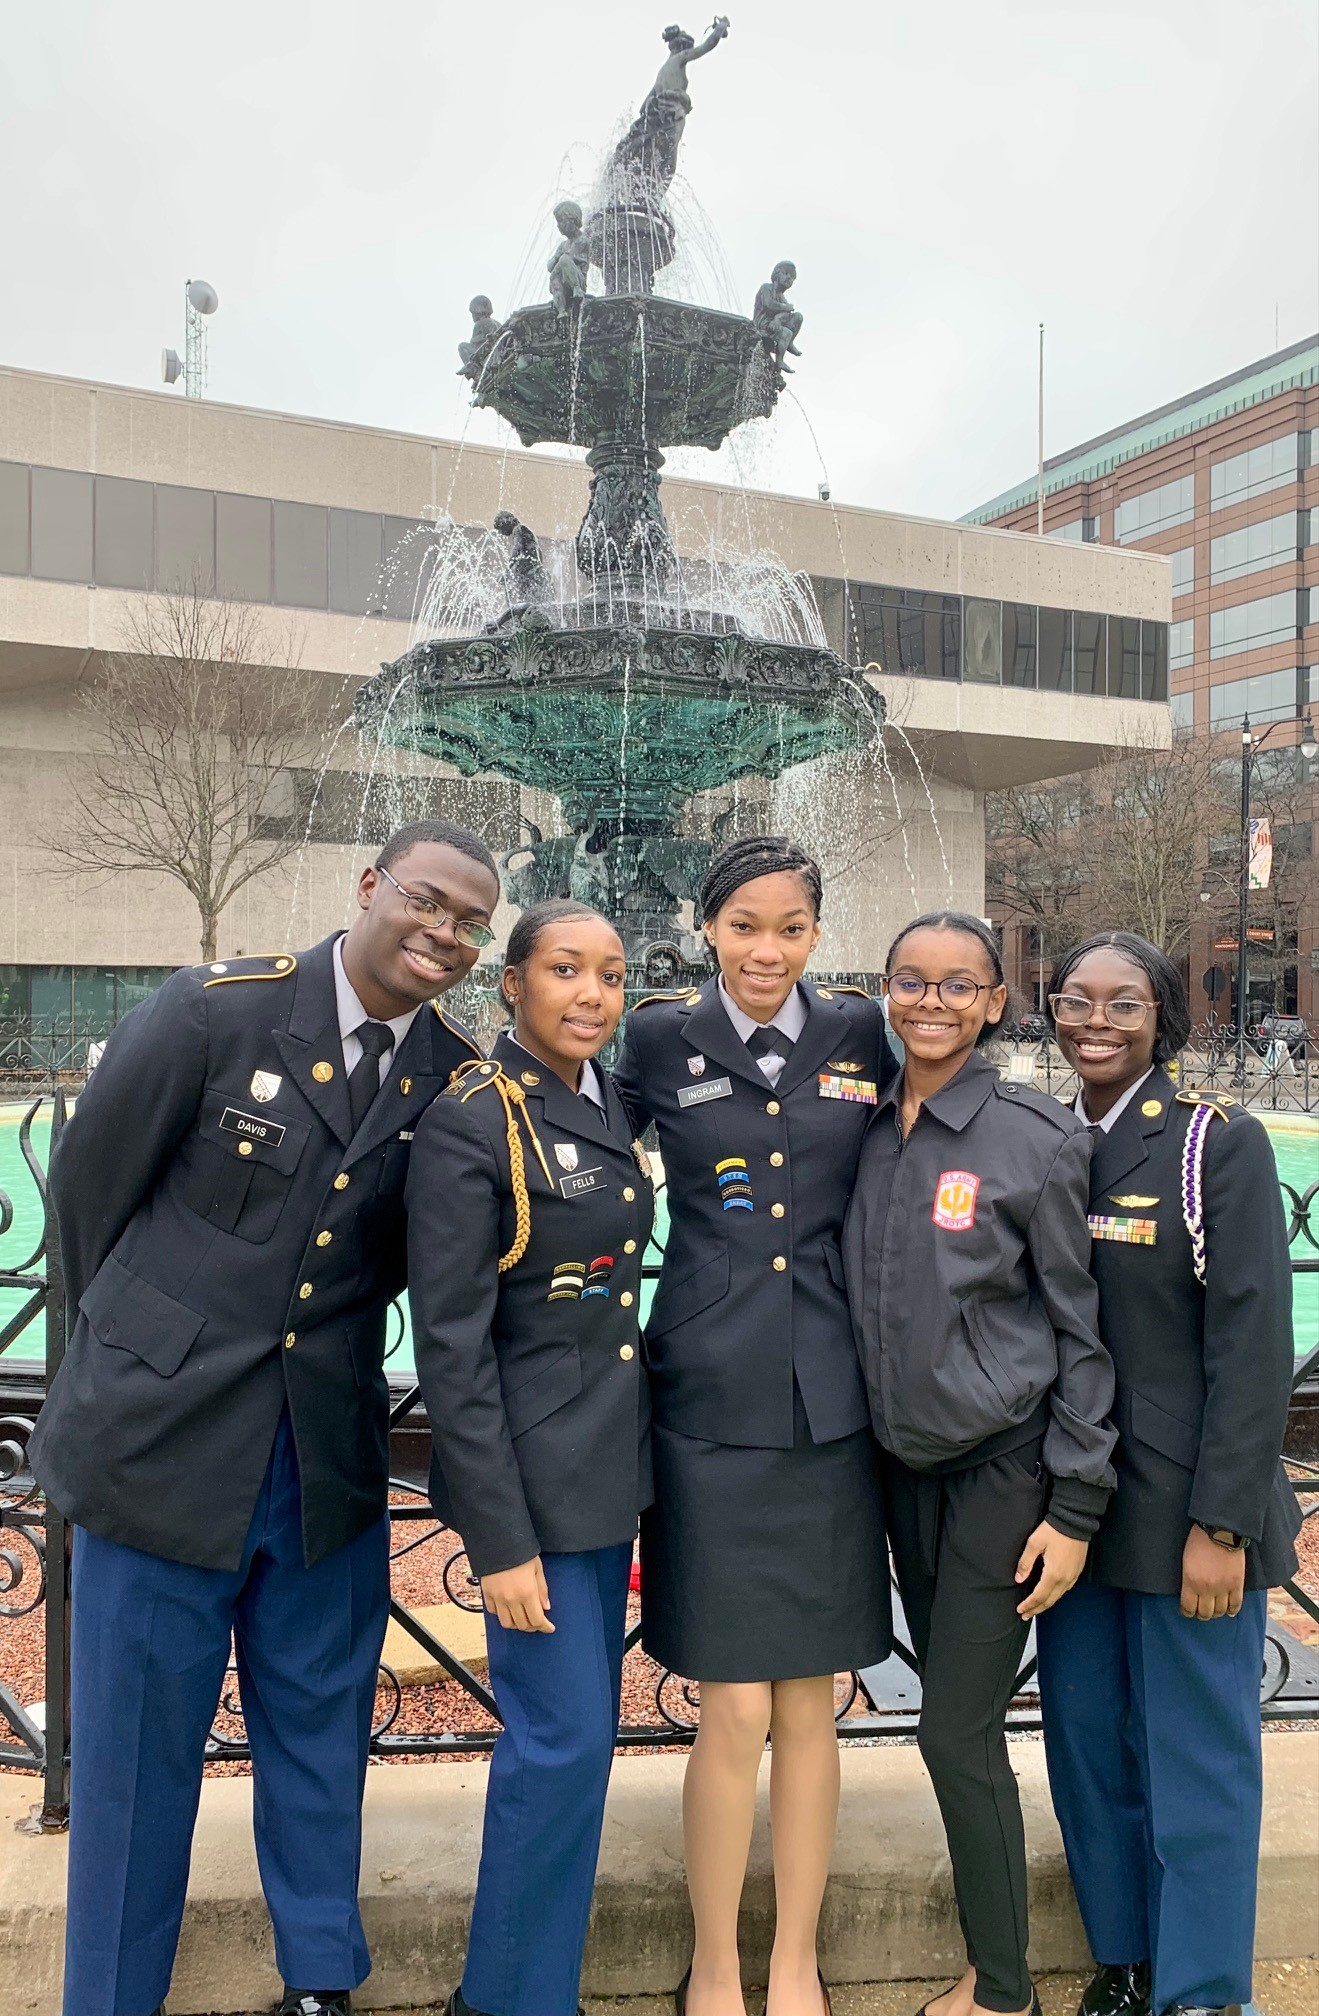 Blount JROTC cadets pose with the fountain at Rosa Parks Memorial on Dexter Avenue in Montgomery, Alabama.